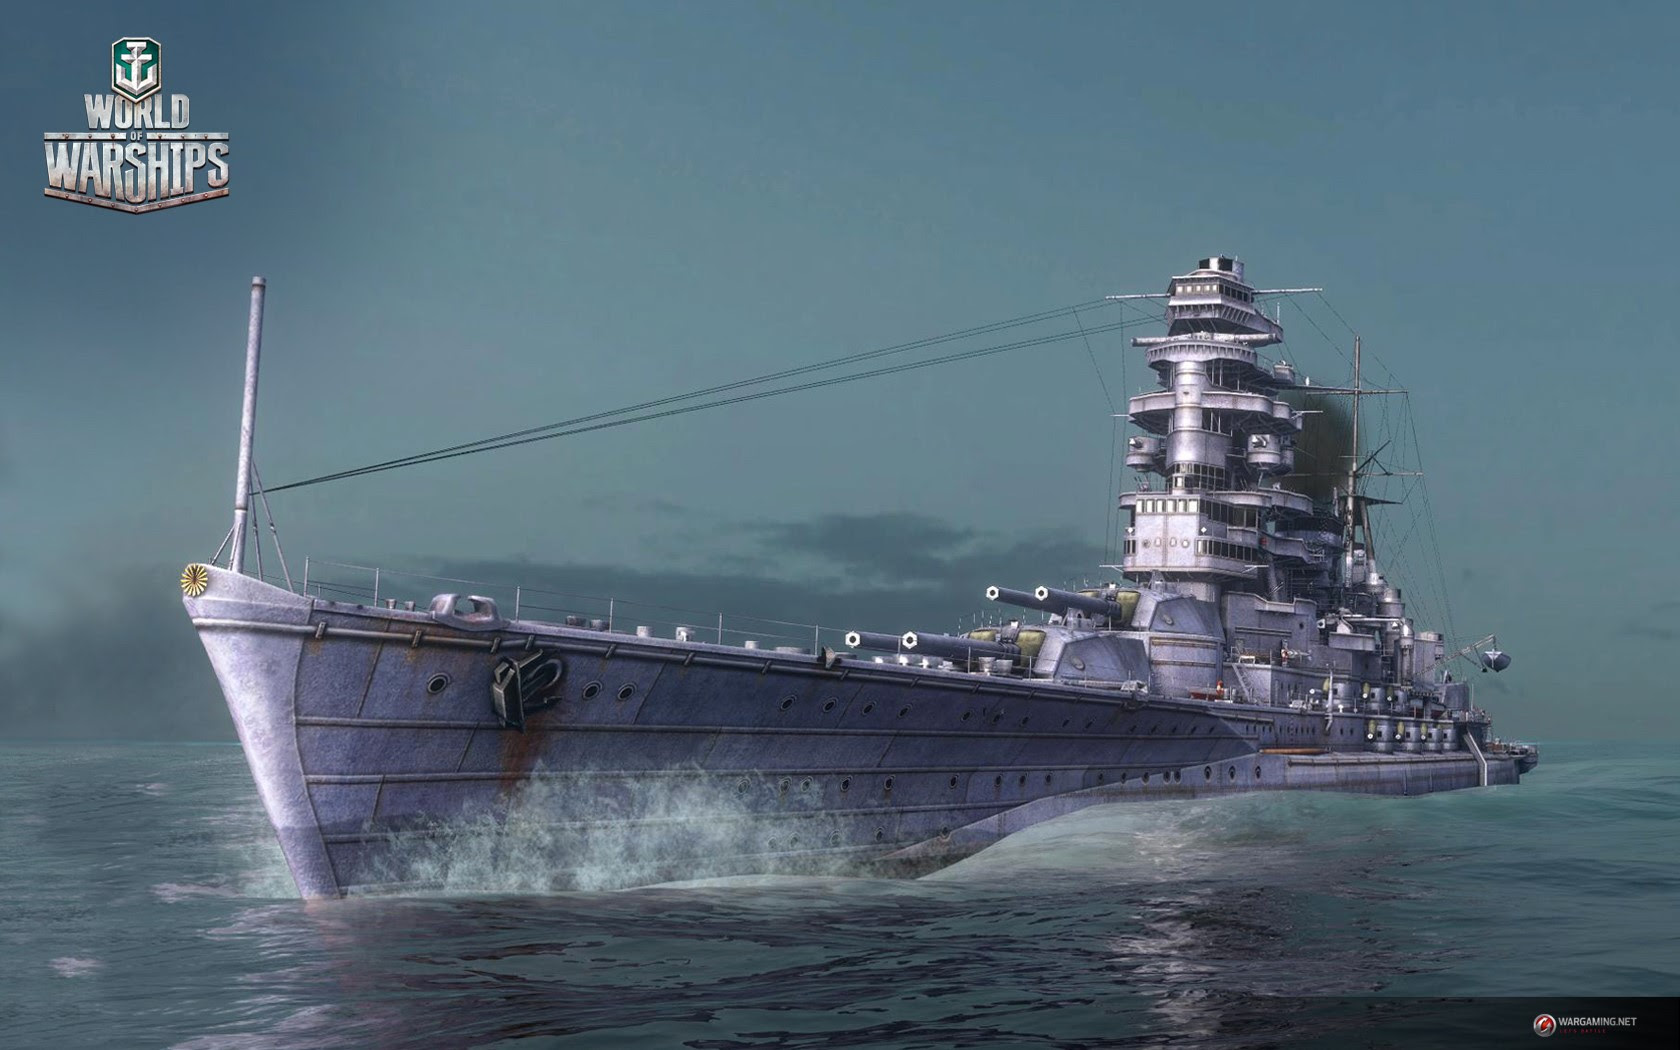 Wows 壁紙 Pc Android Iphoneの壁紙画像 Anihonetwall